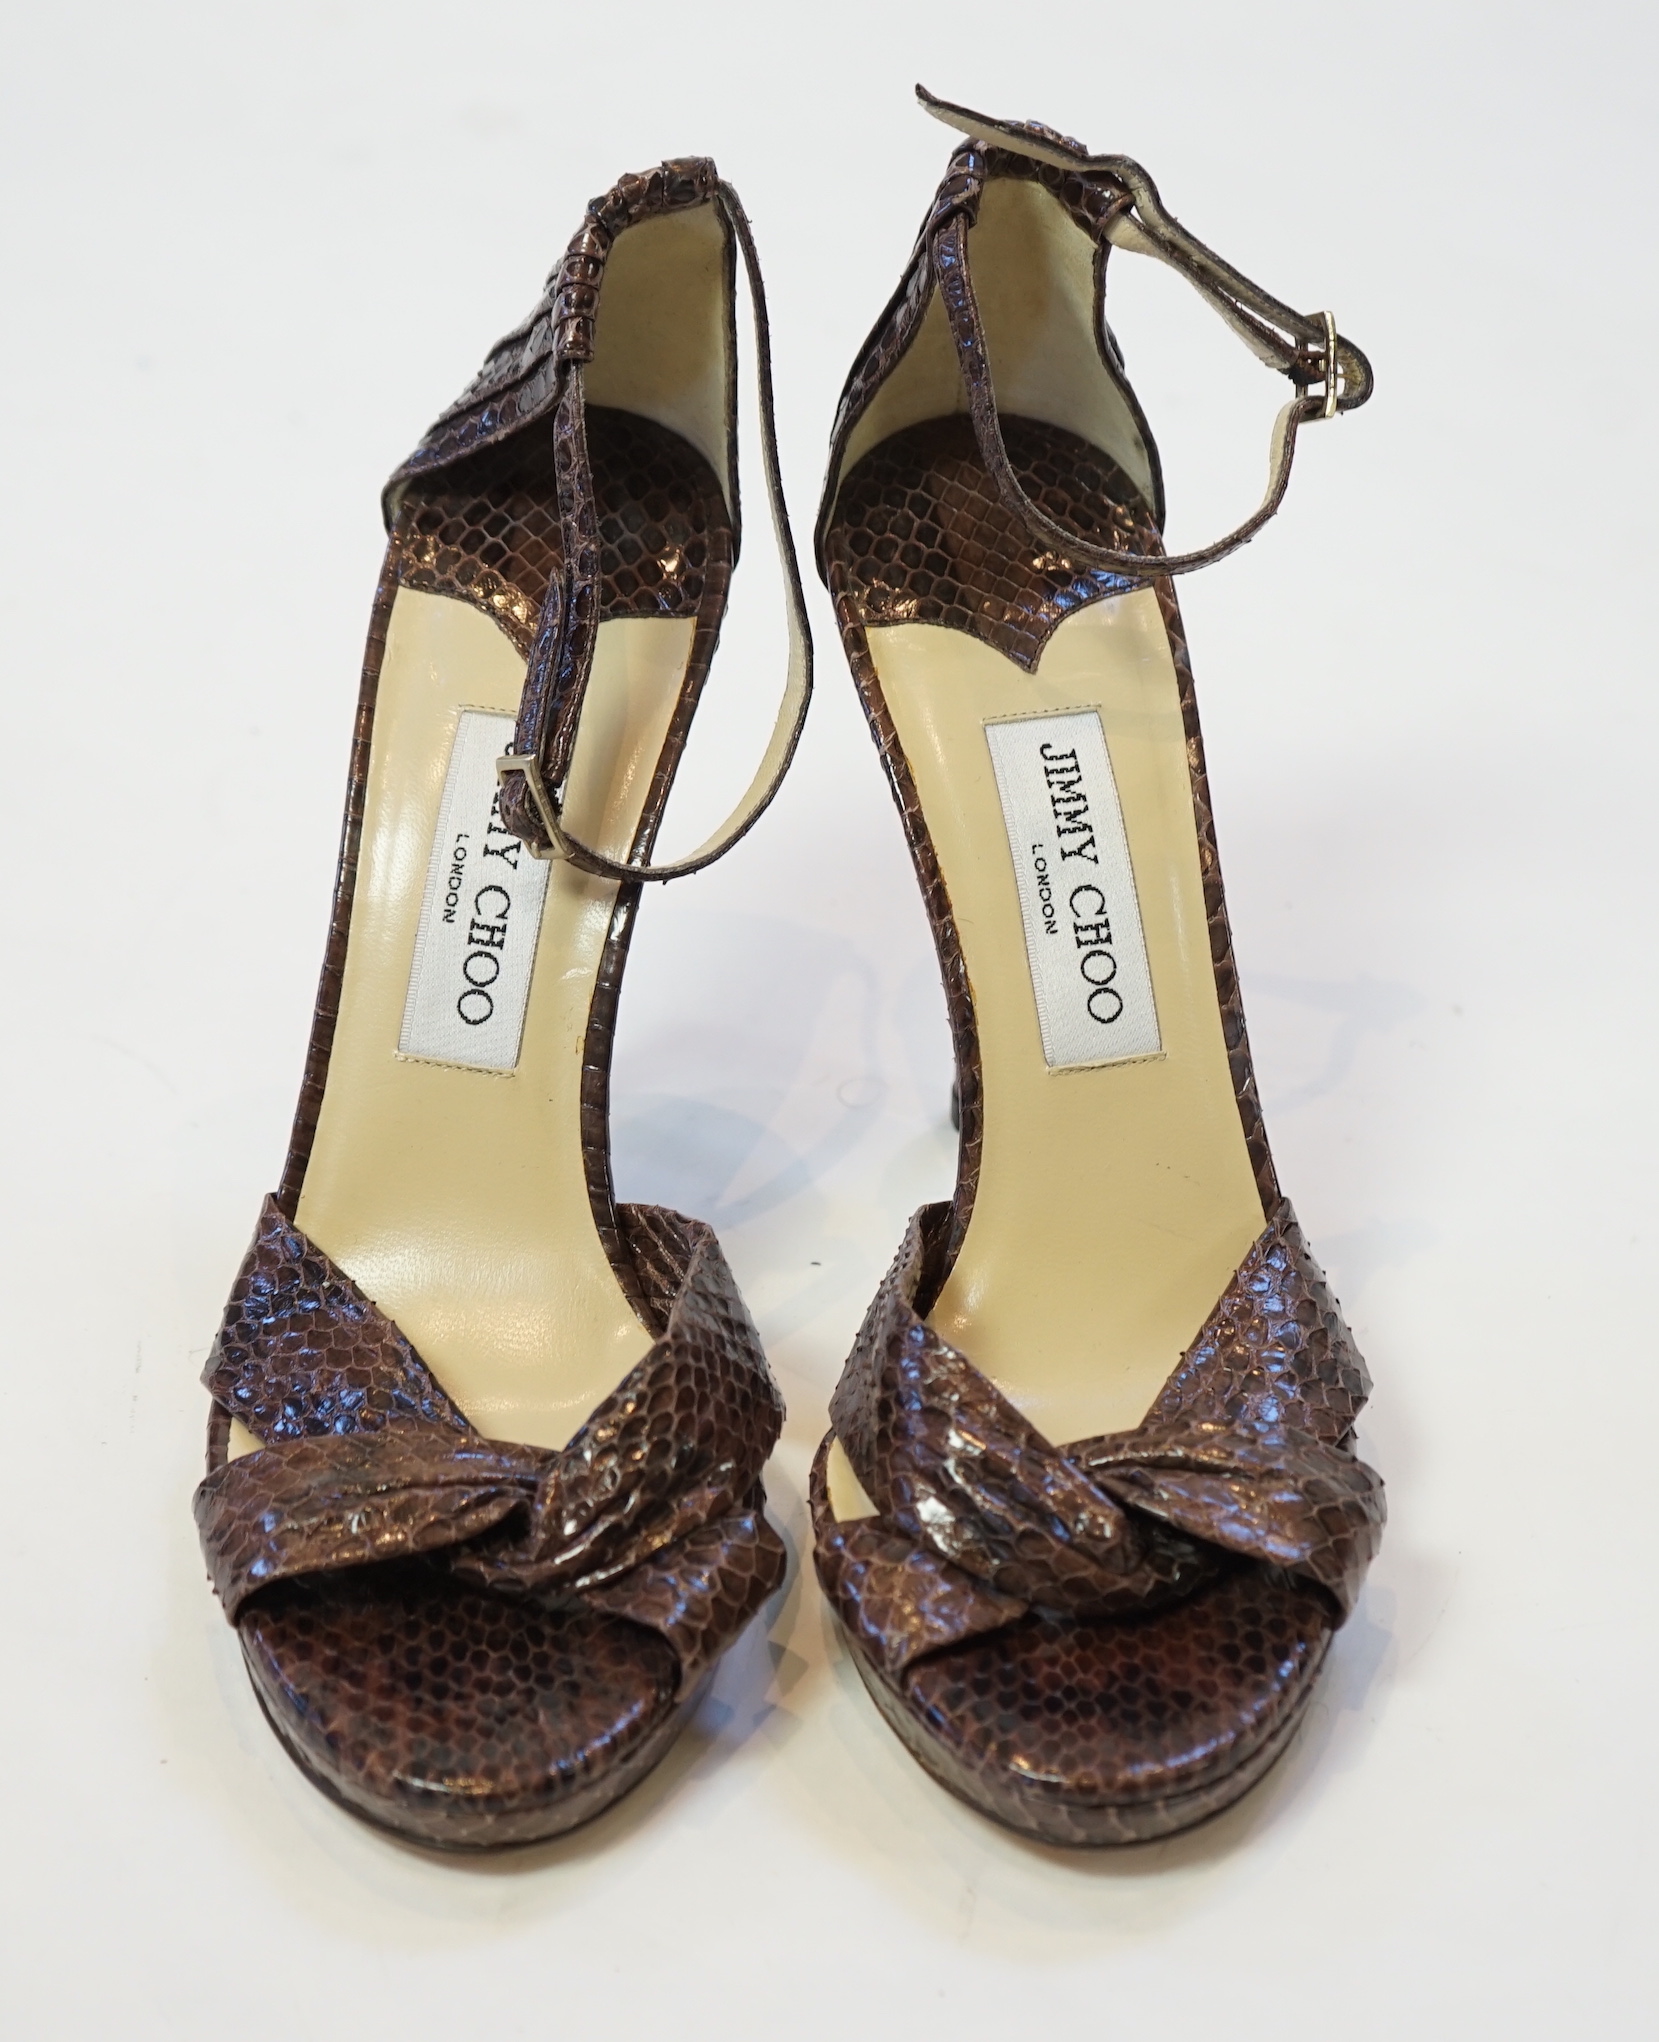 A pair of Jimmy Choo lady's brown snakeskin sandals, size EU 39